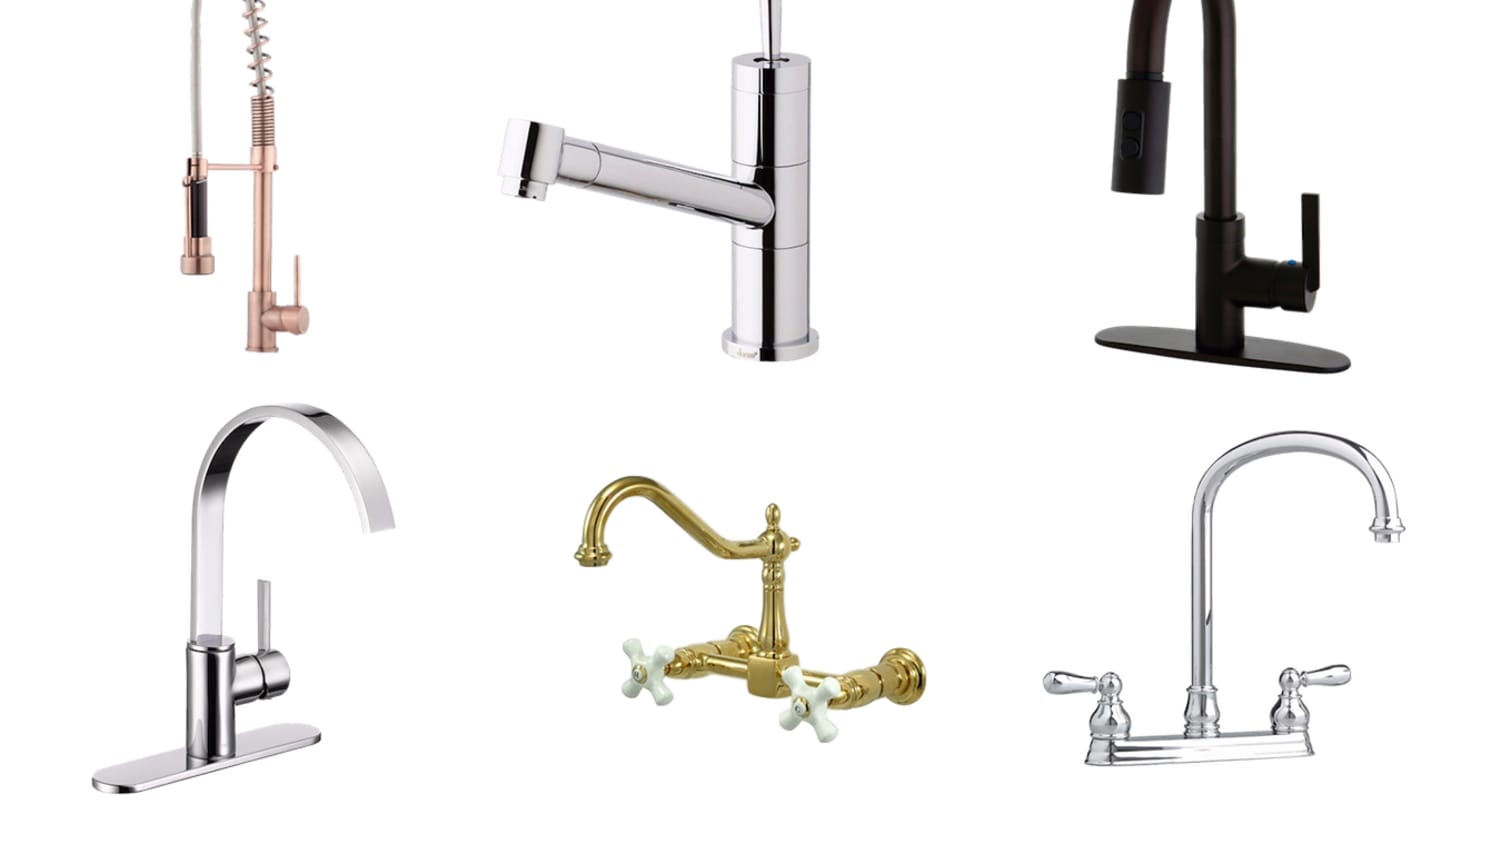 A Stylish Kitchen For Less 10 Great Looking Kitchen Faucets Under